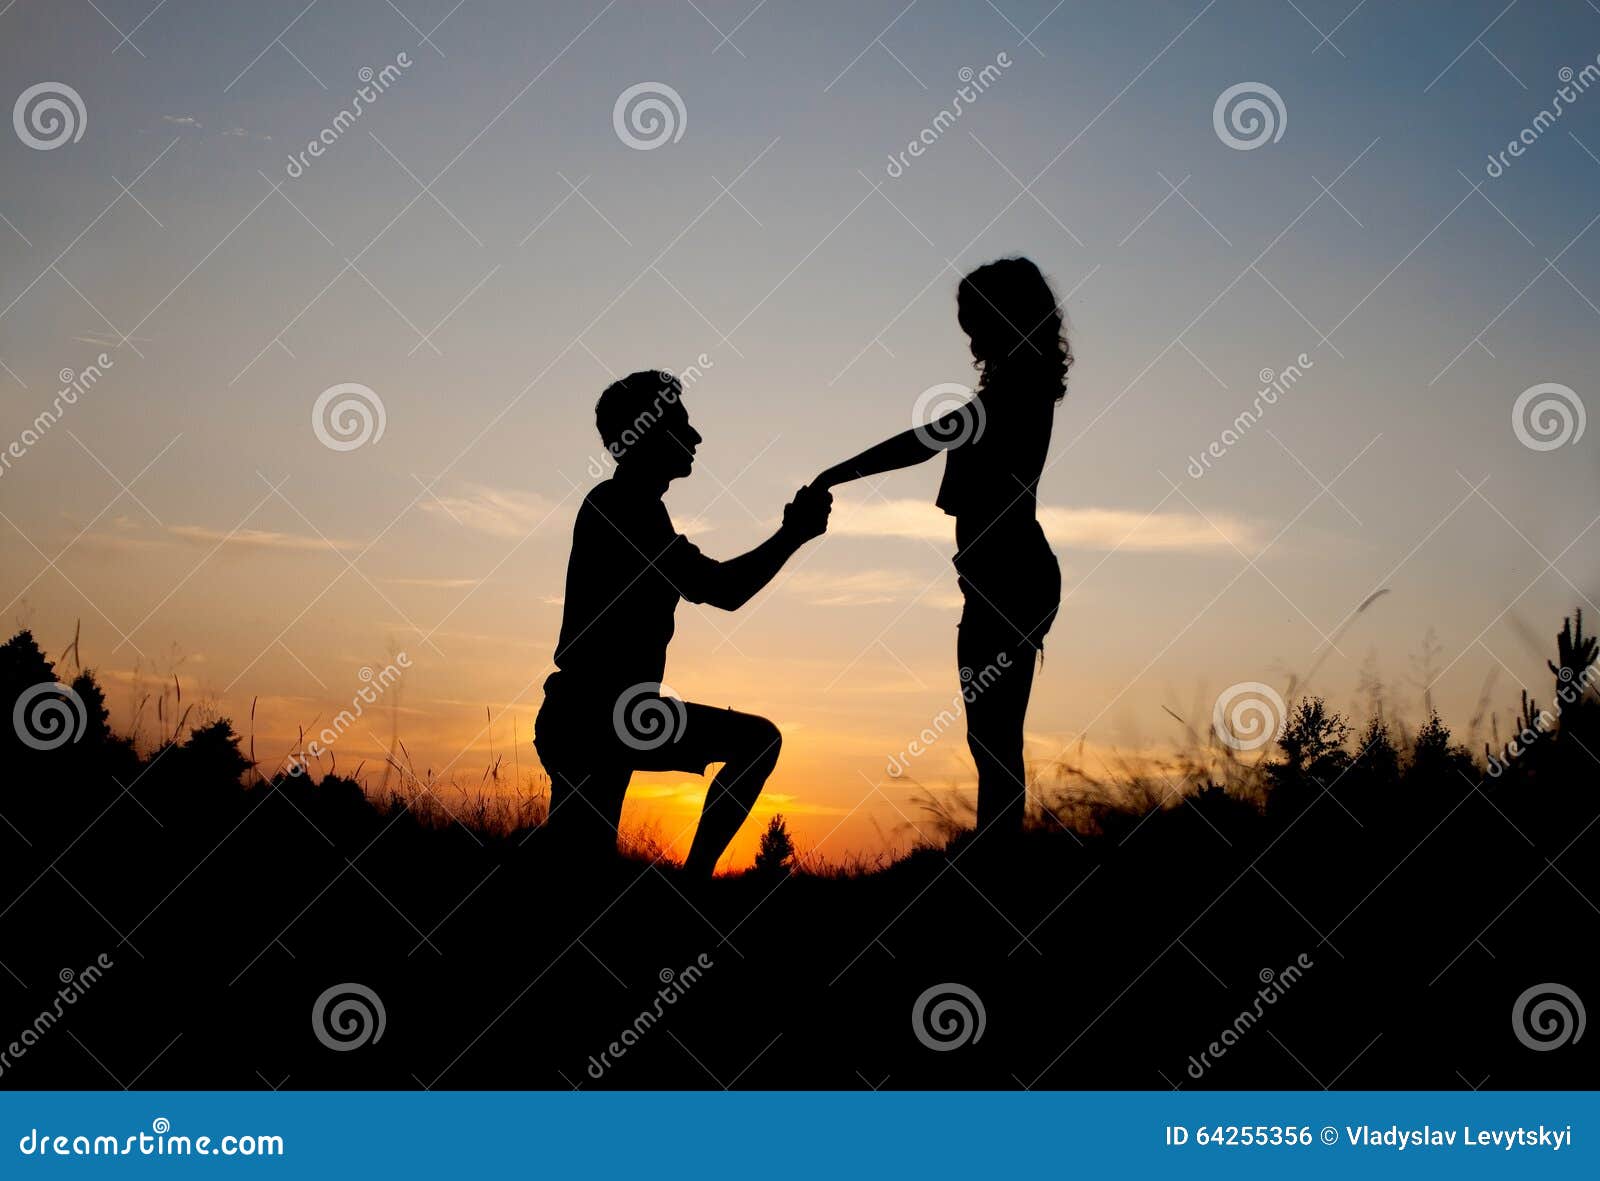 marriage proposal sunset